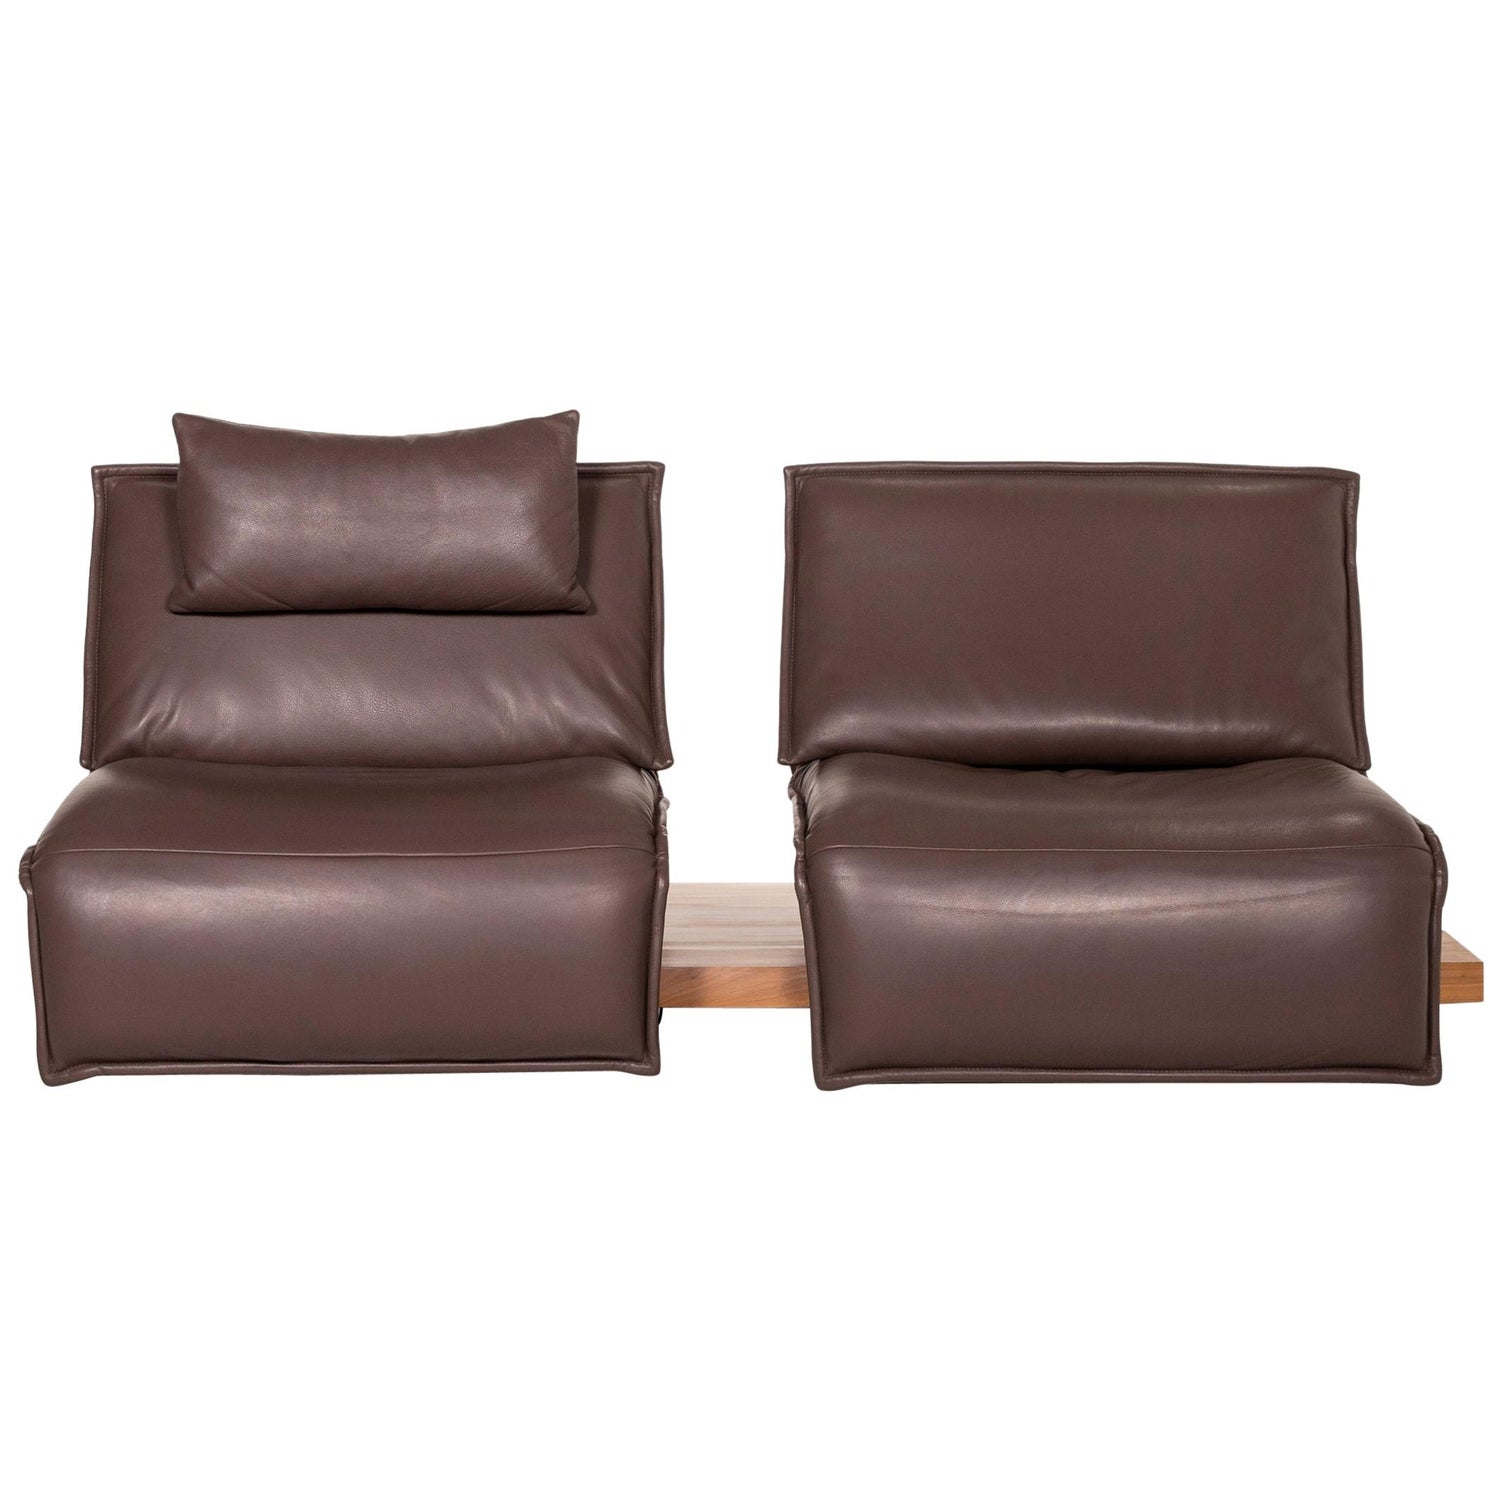 Koinor Free Motion Edit Leather Sofa Dark Brown Two-Seat Incl. Electr.  Relax at 1stDibs | koinor edit 3, koinor edit free motion, koinor sofa free  motion